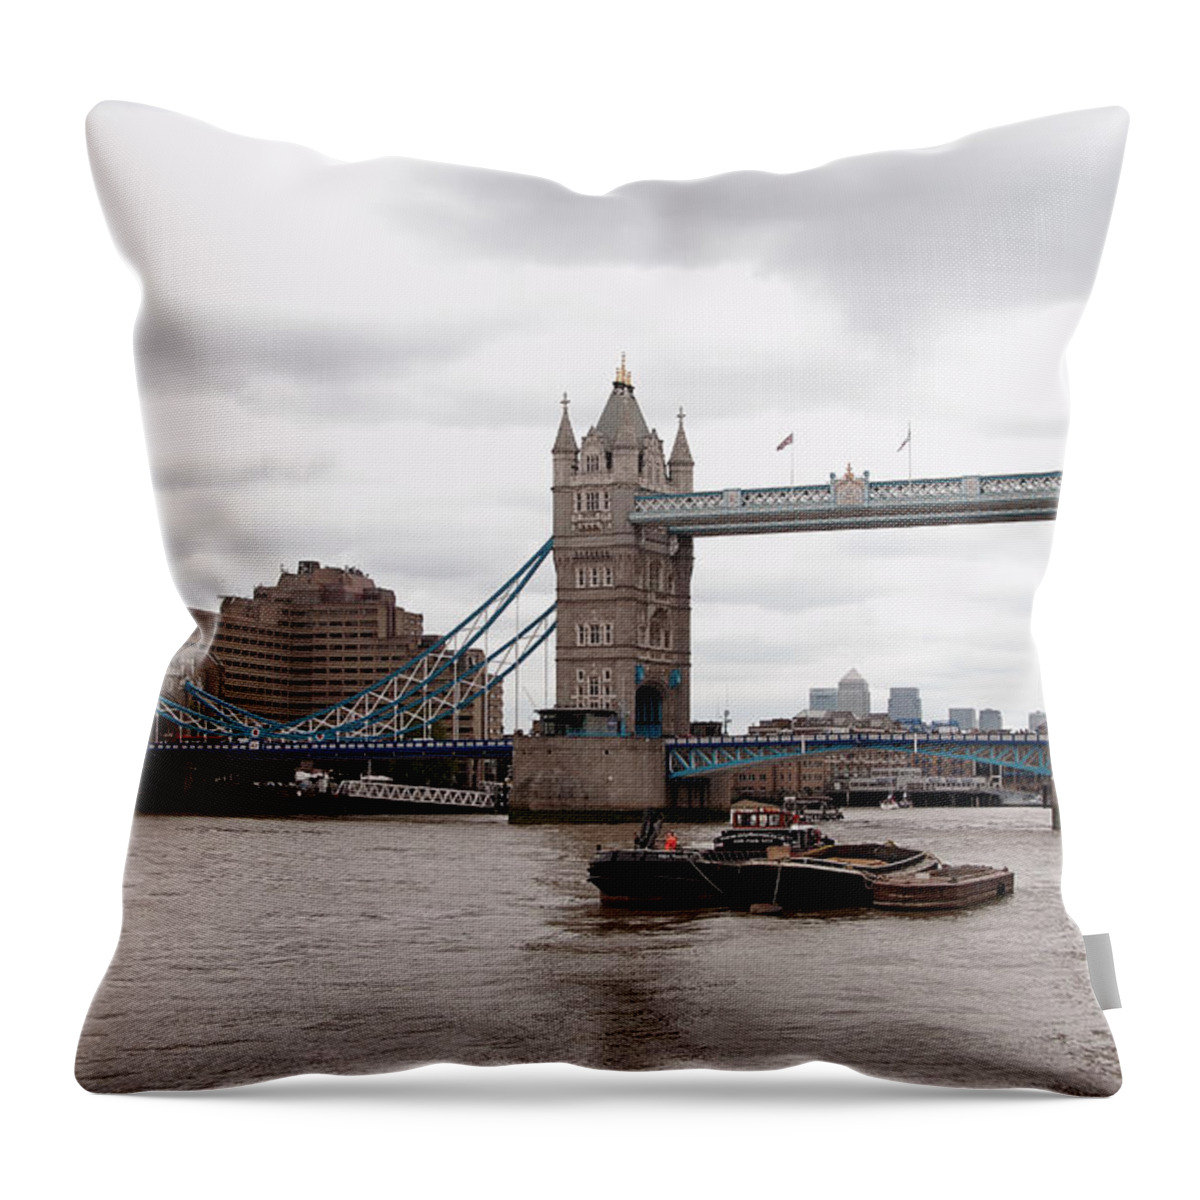 London Throw Pillow featuring the photograph Tower Bridge by Nicky Jameson